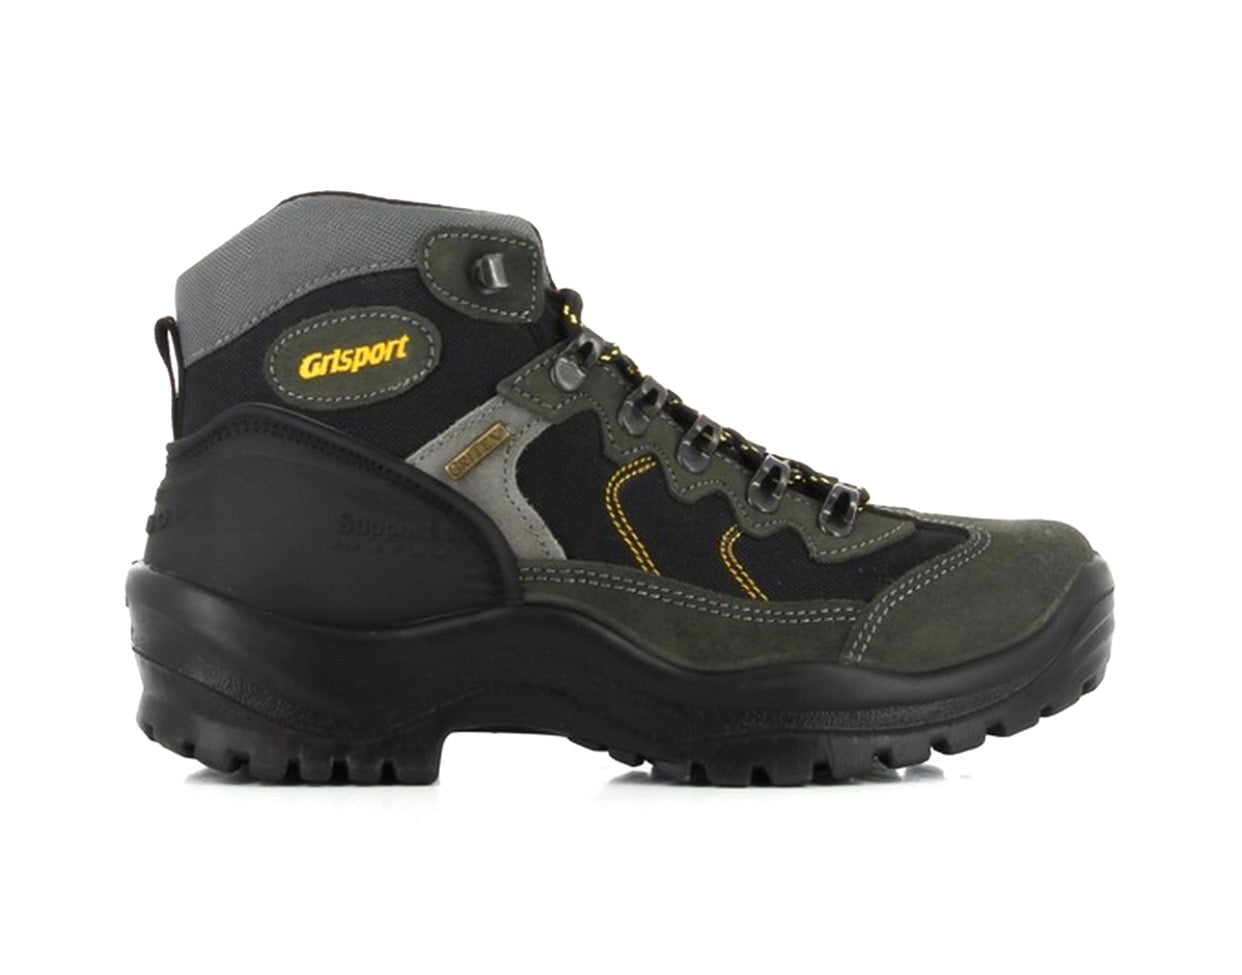 Grisport 10694S12G Grigio Scuro Green Black Grey 6 Eyelet Hiking Boot Made In Italy